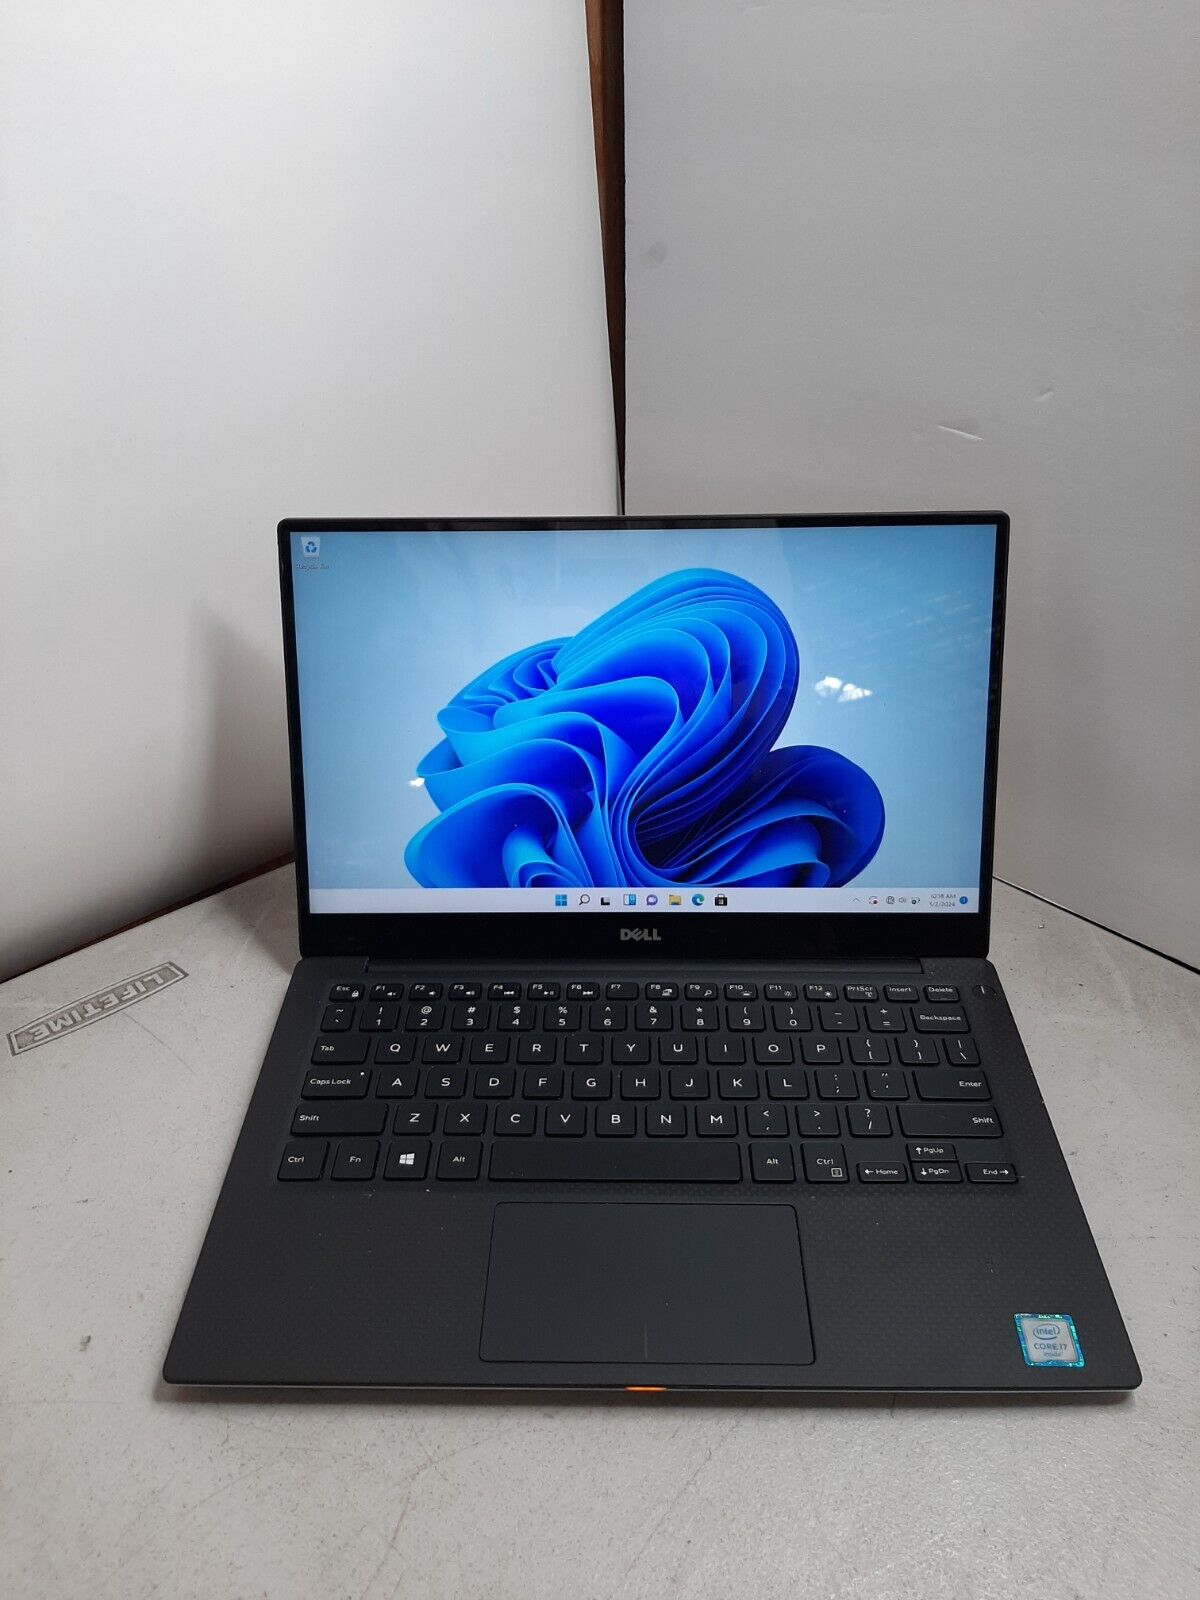 Dell XPS 13 9350 13.3